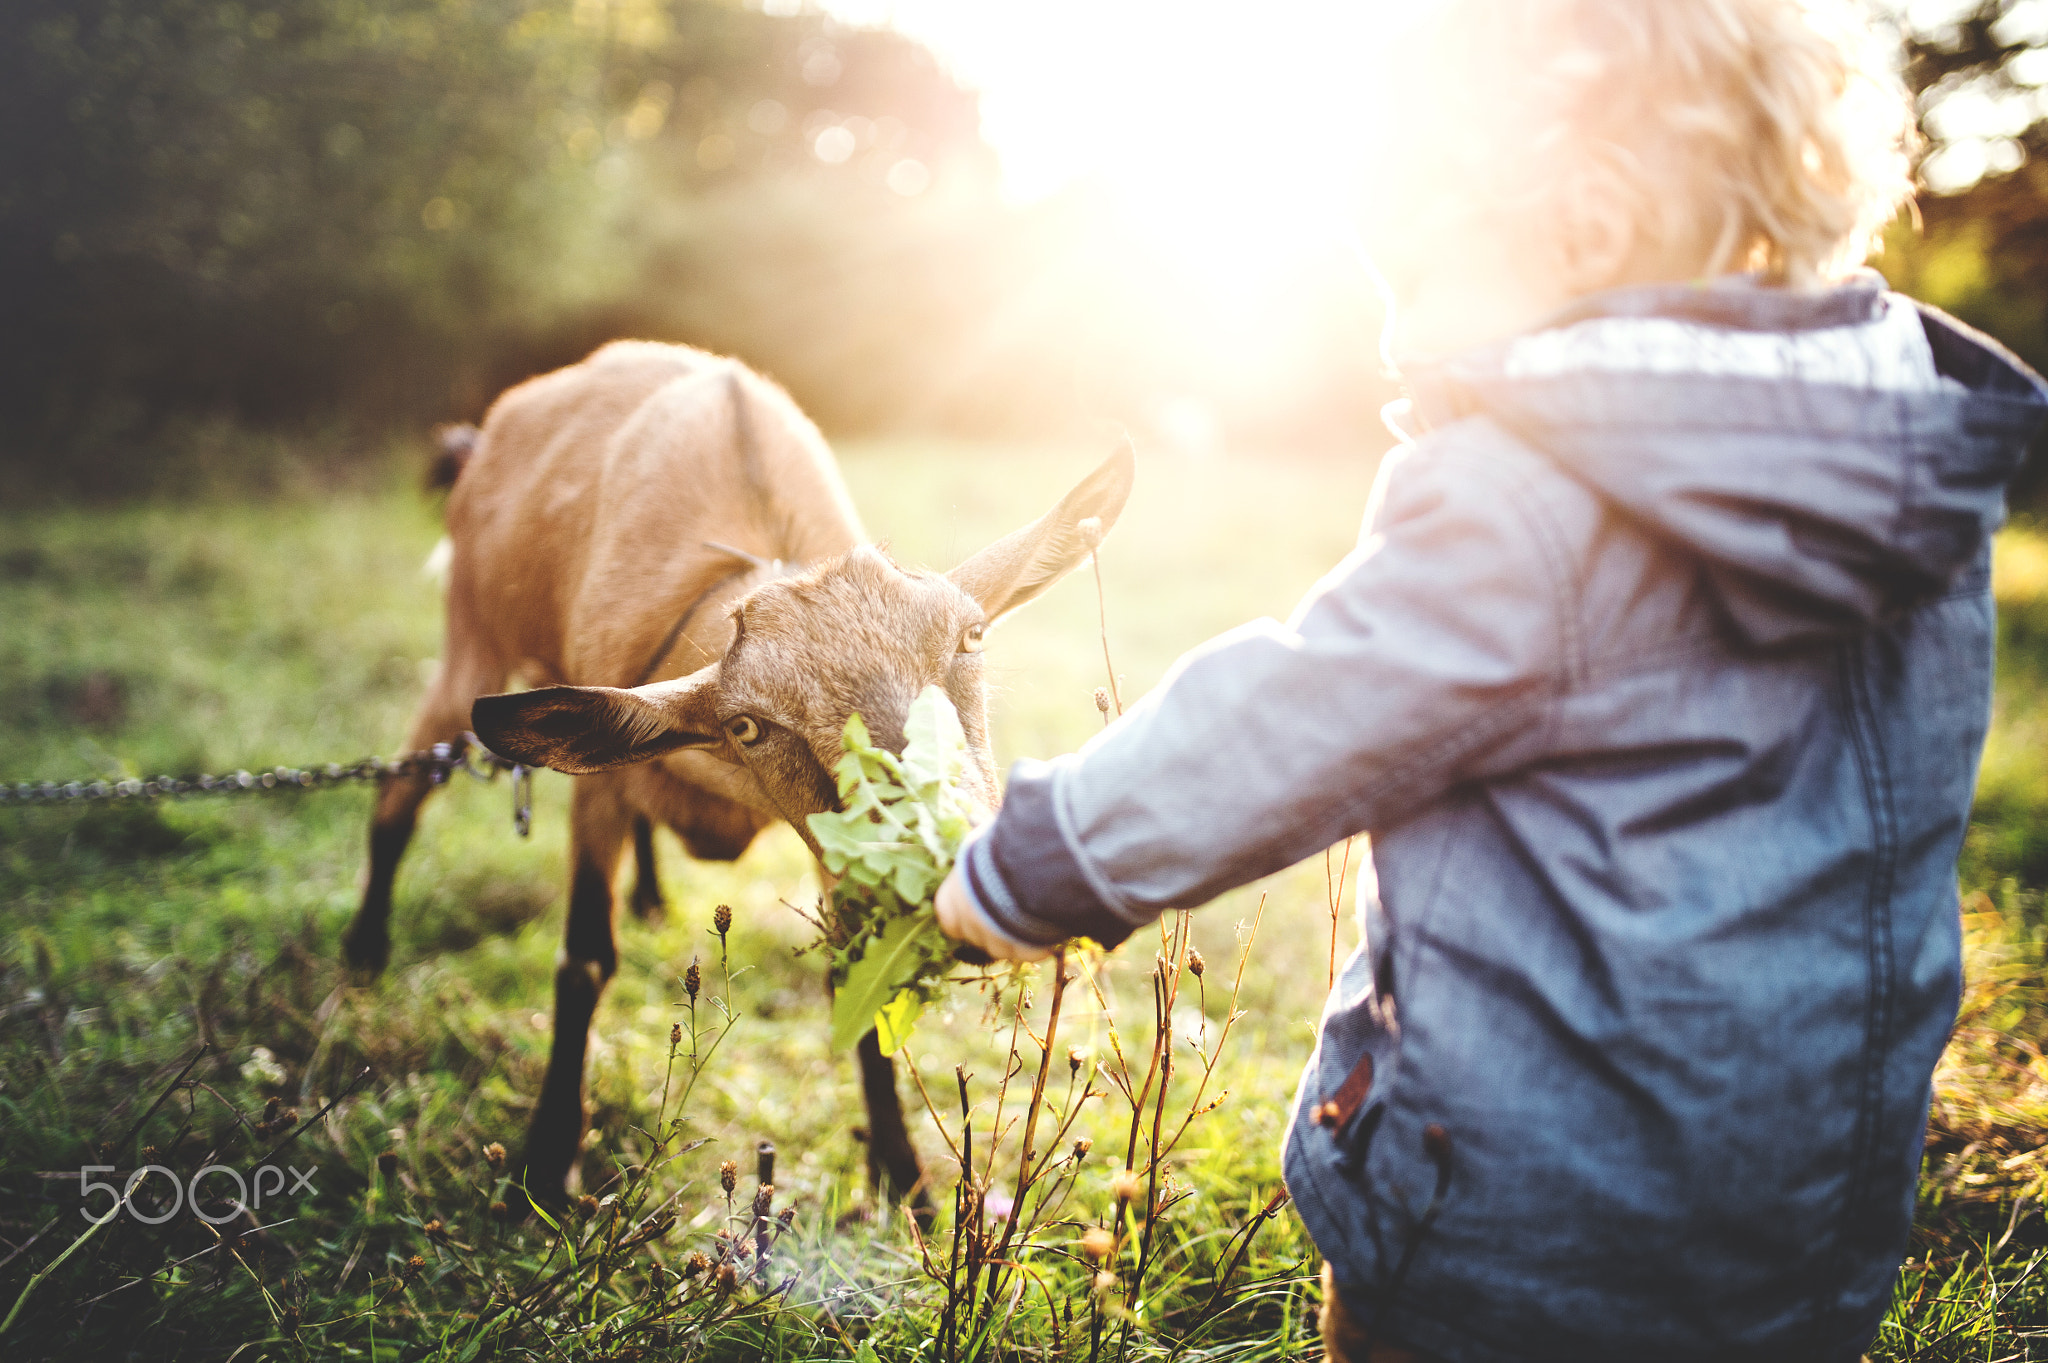 A little toddler boy feeding a goat outdoors on a meadow at sunset.